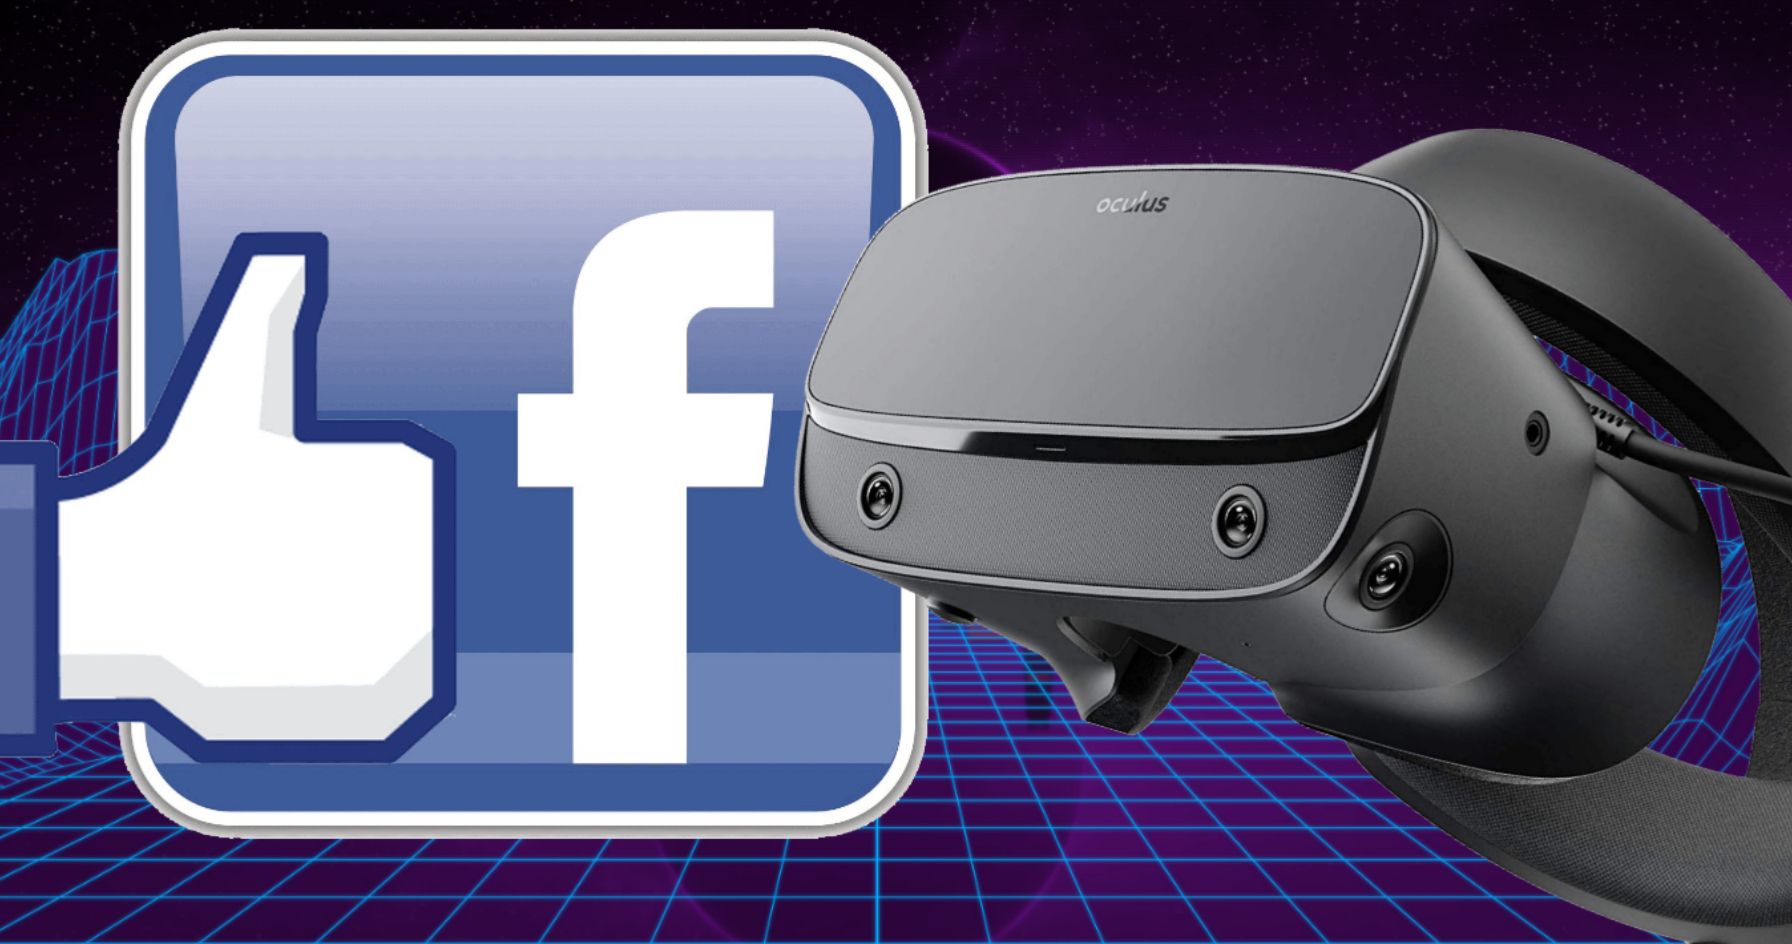 Oculus VR Devices Will Soon Require Facebook Login for First Time Users